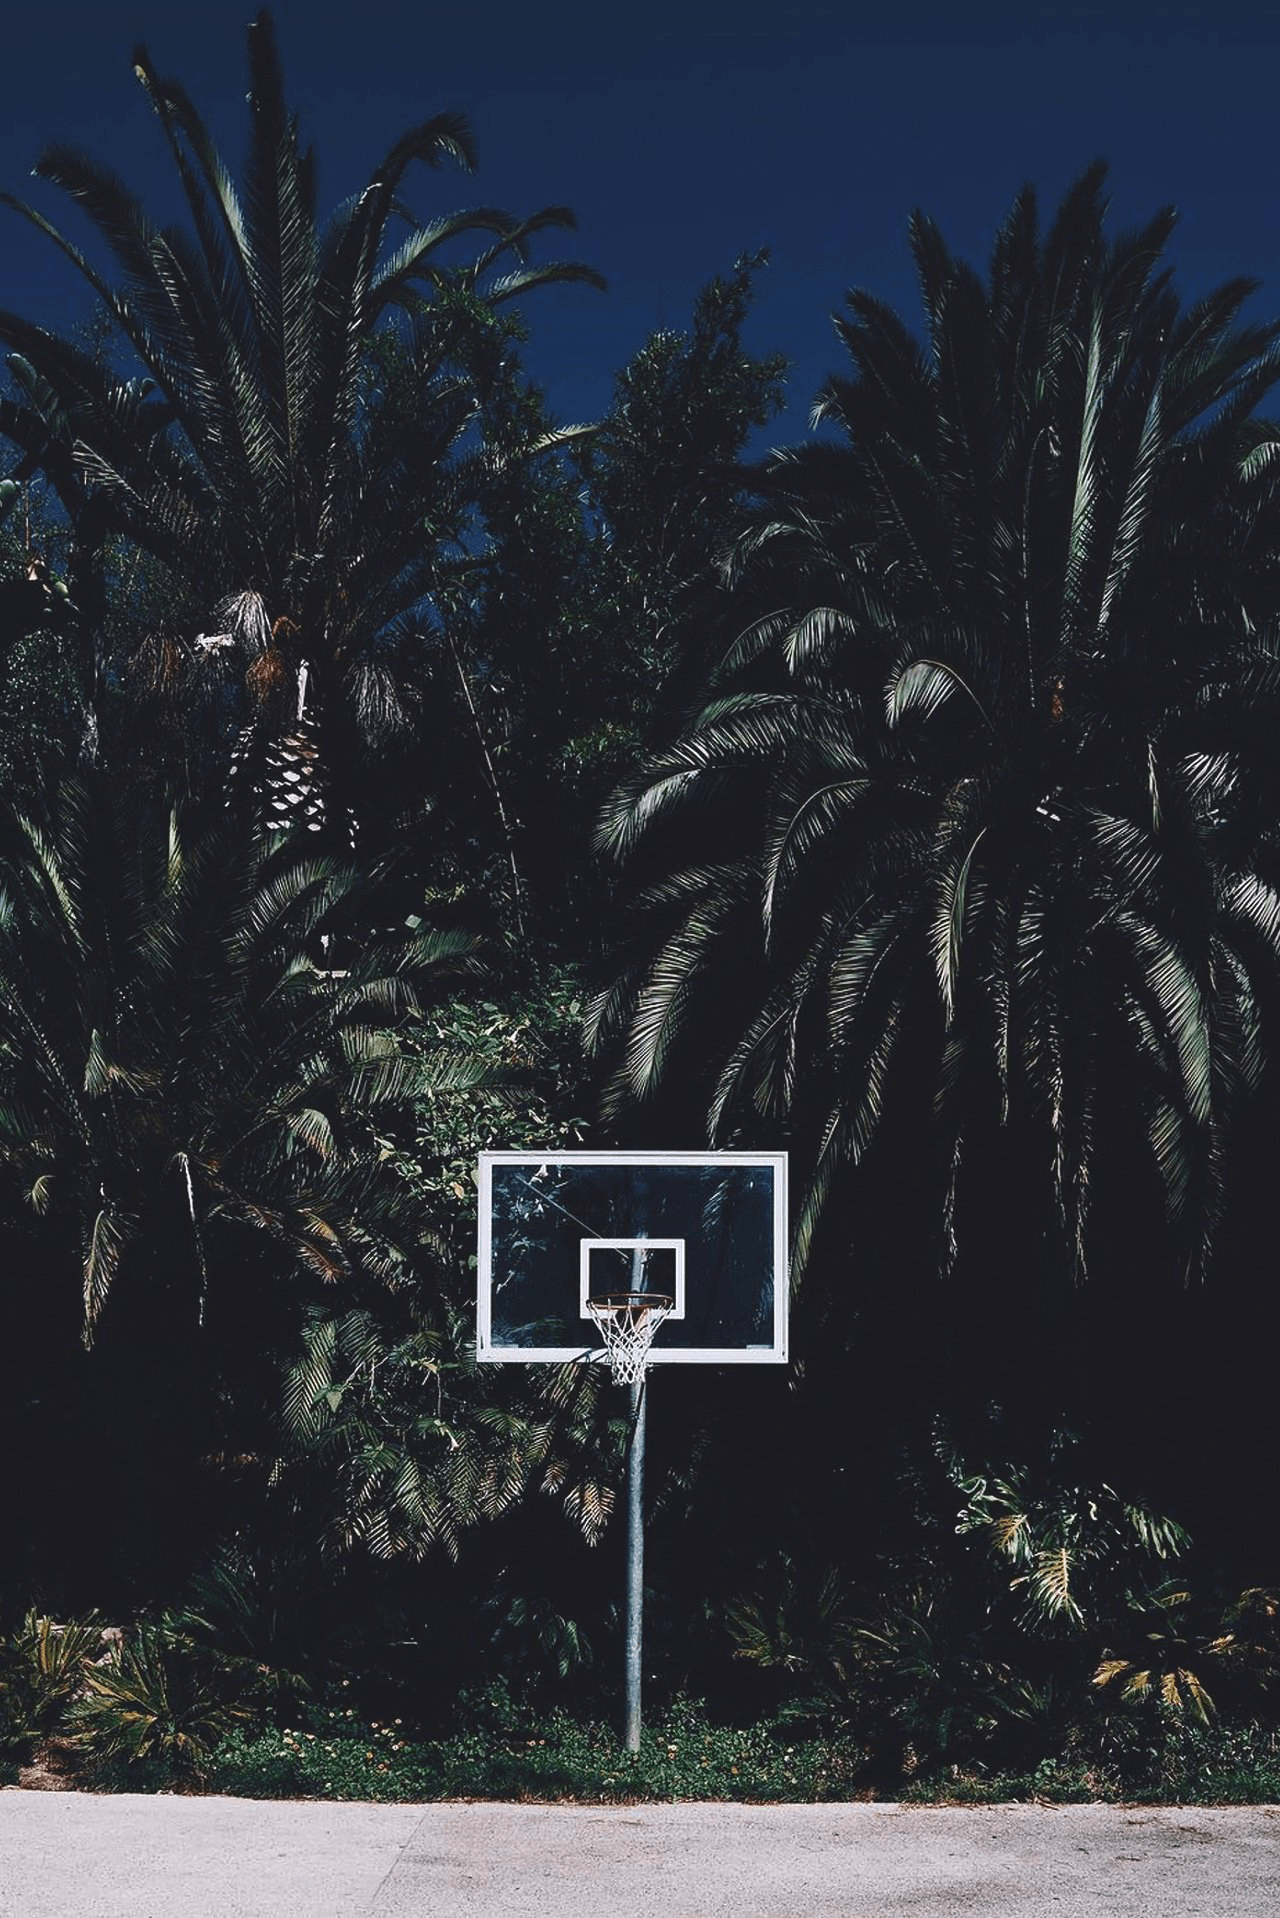 A basketball hoop in the middle of palm trees - Basketball